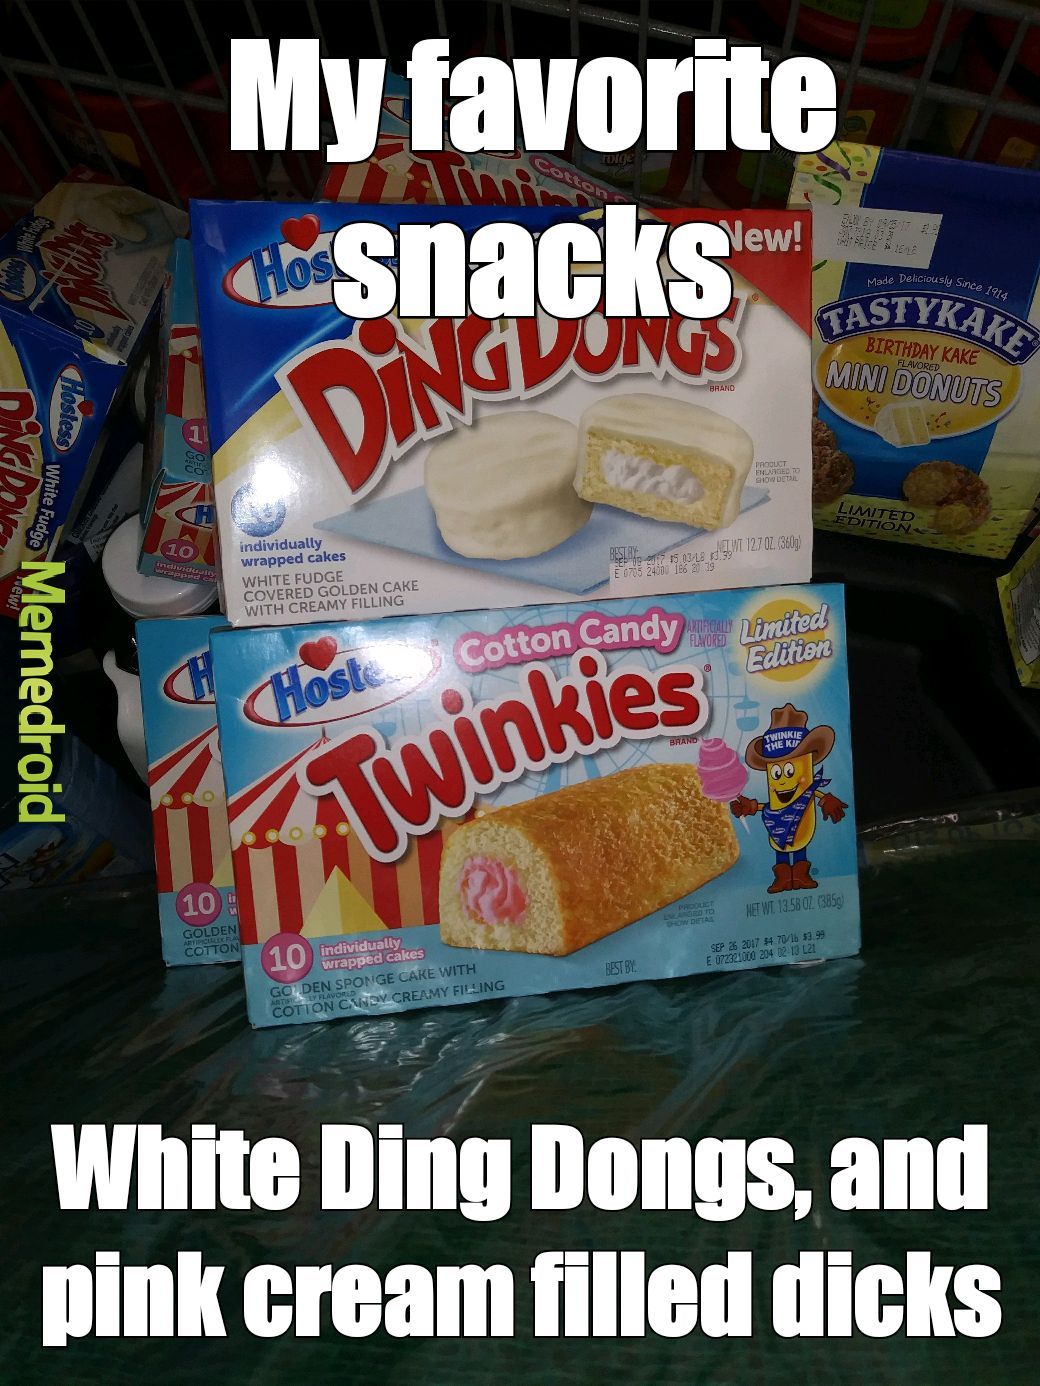 This looks like a snack for me - meme